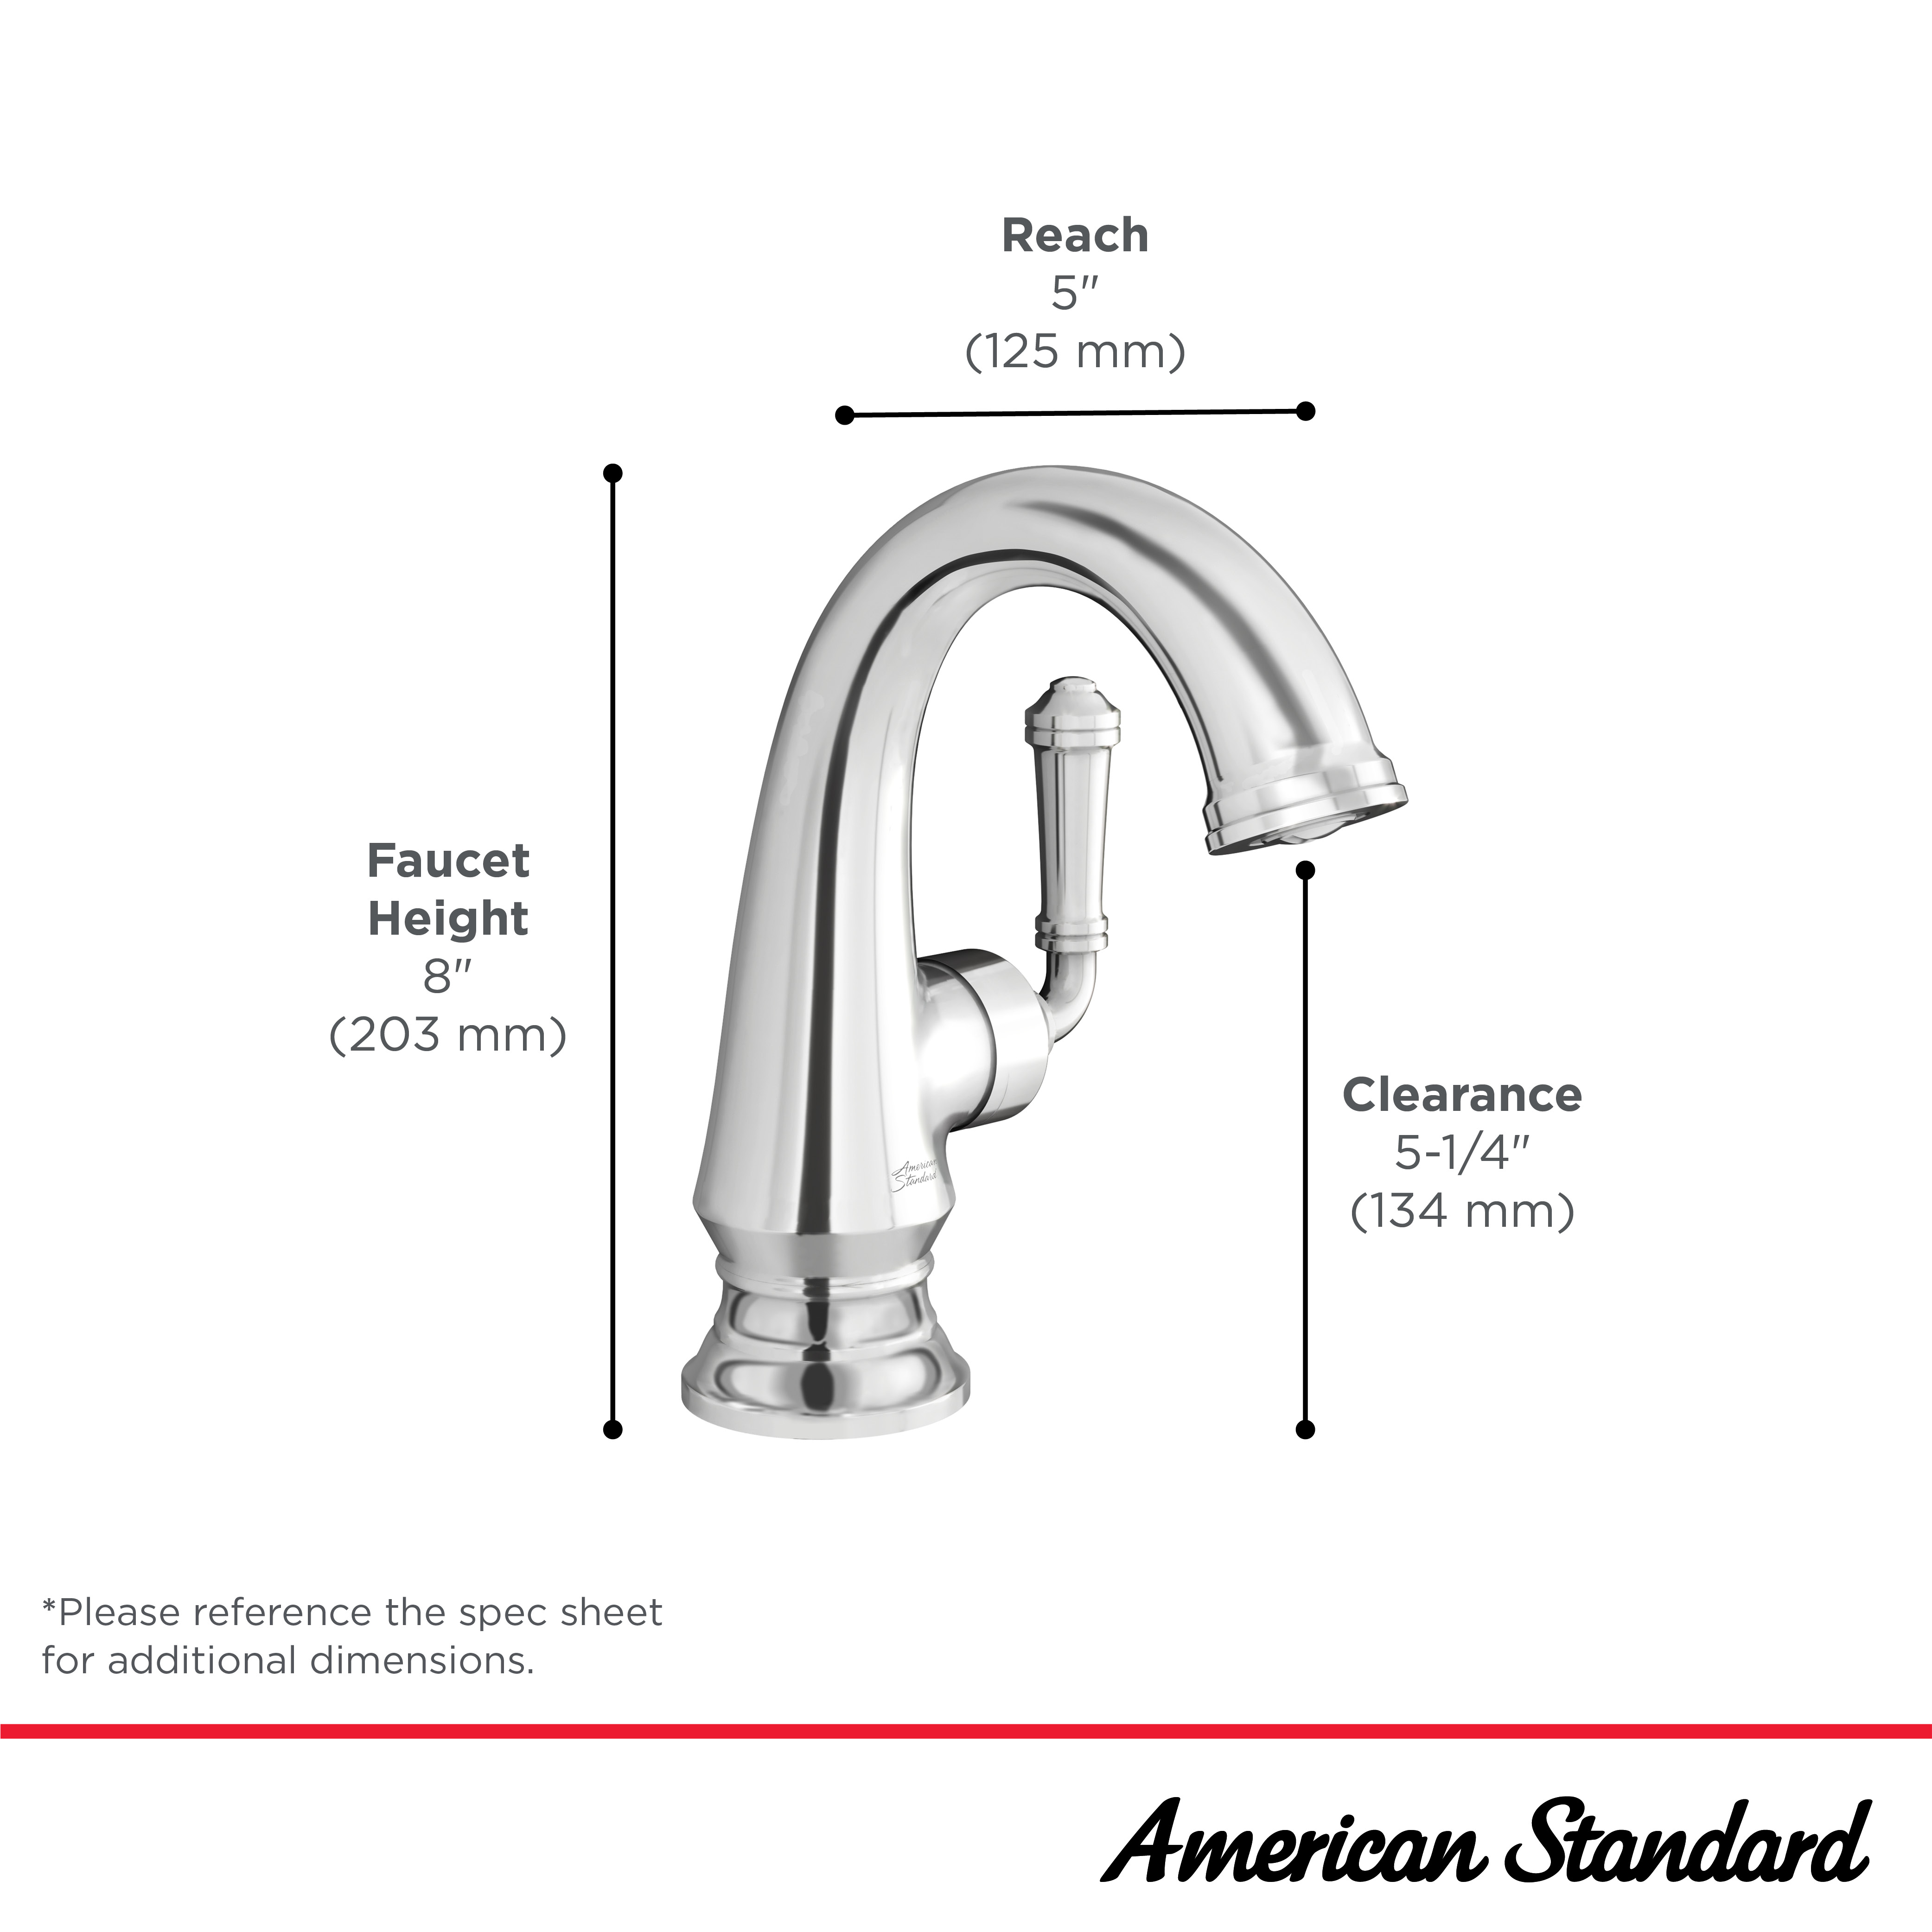 Delancey® Single Hole Single-Handle Bathroom Faucet 1.2 gpm/4.5 L/min With Lever Handle